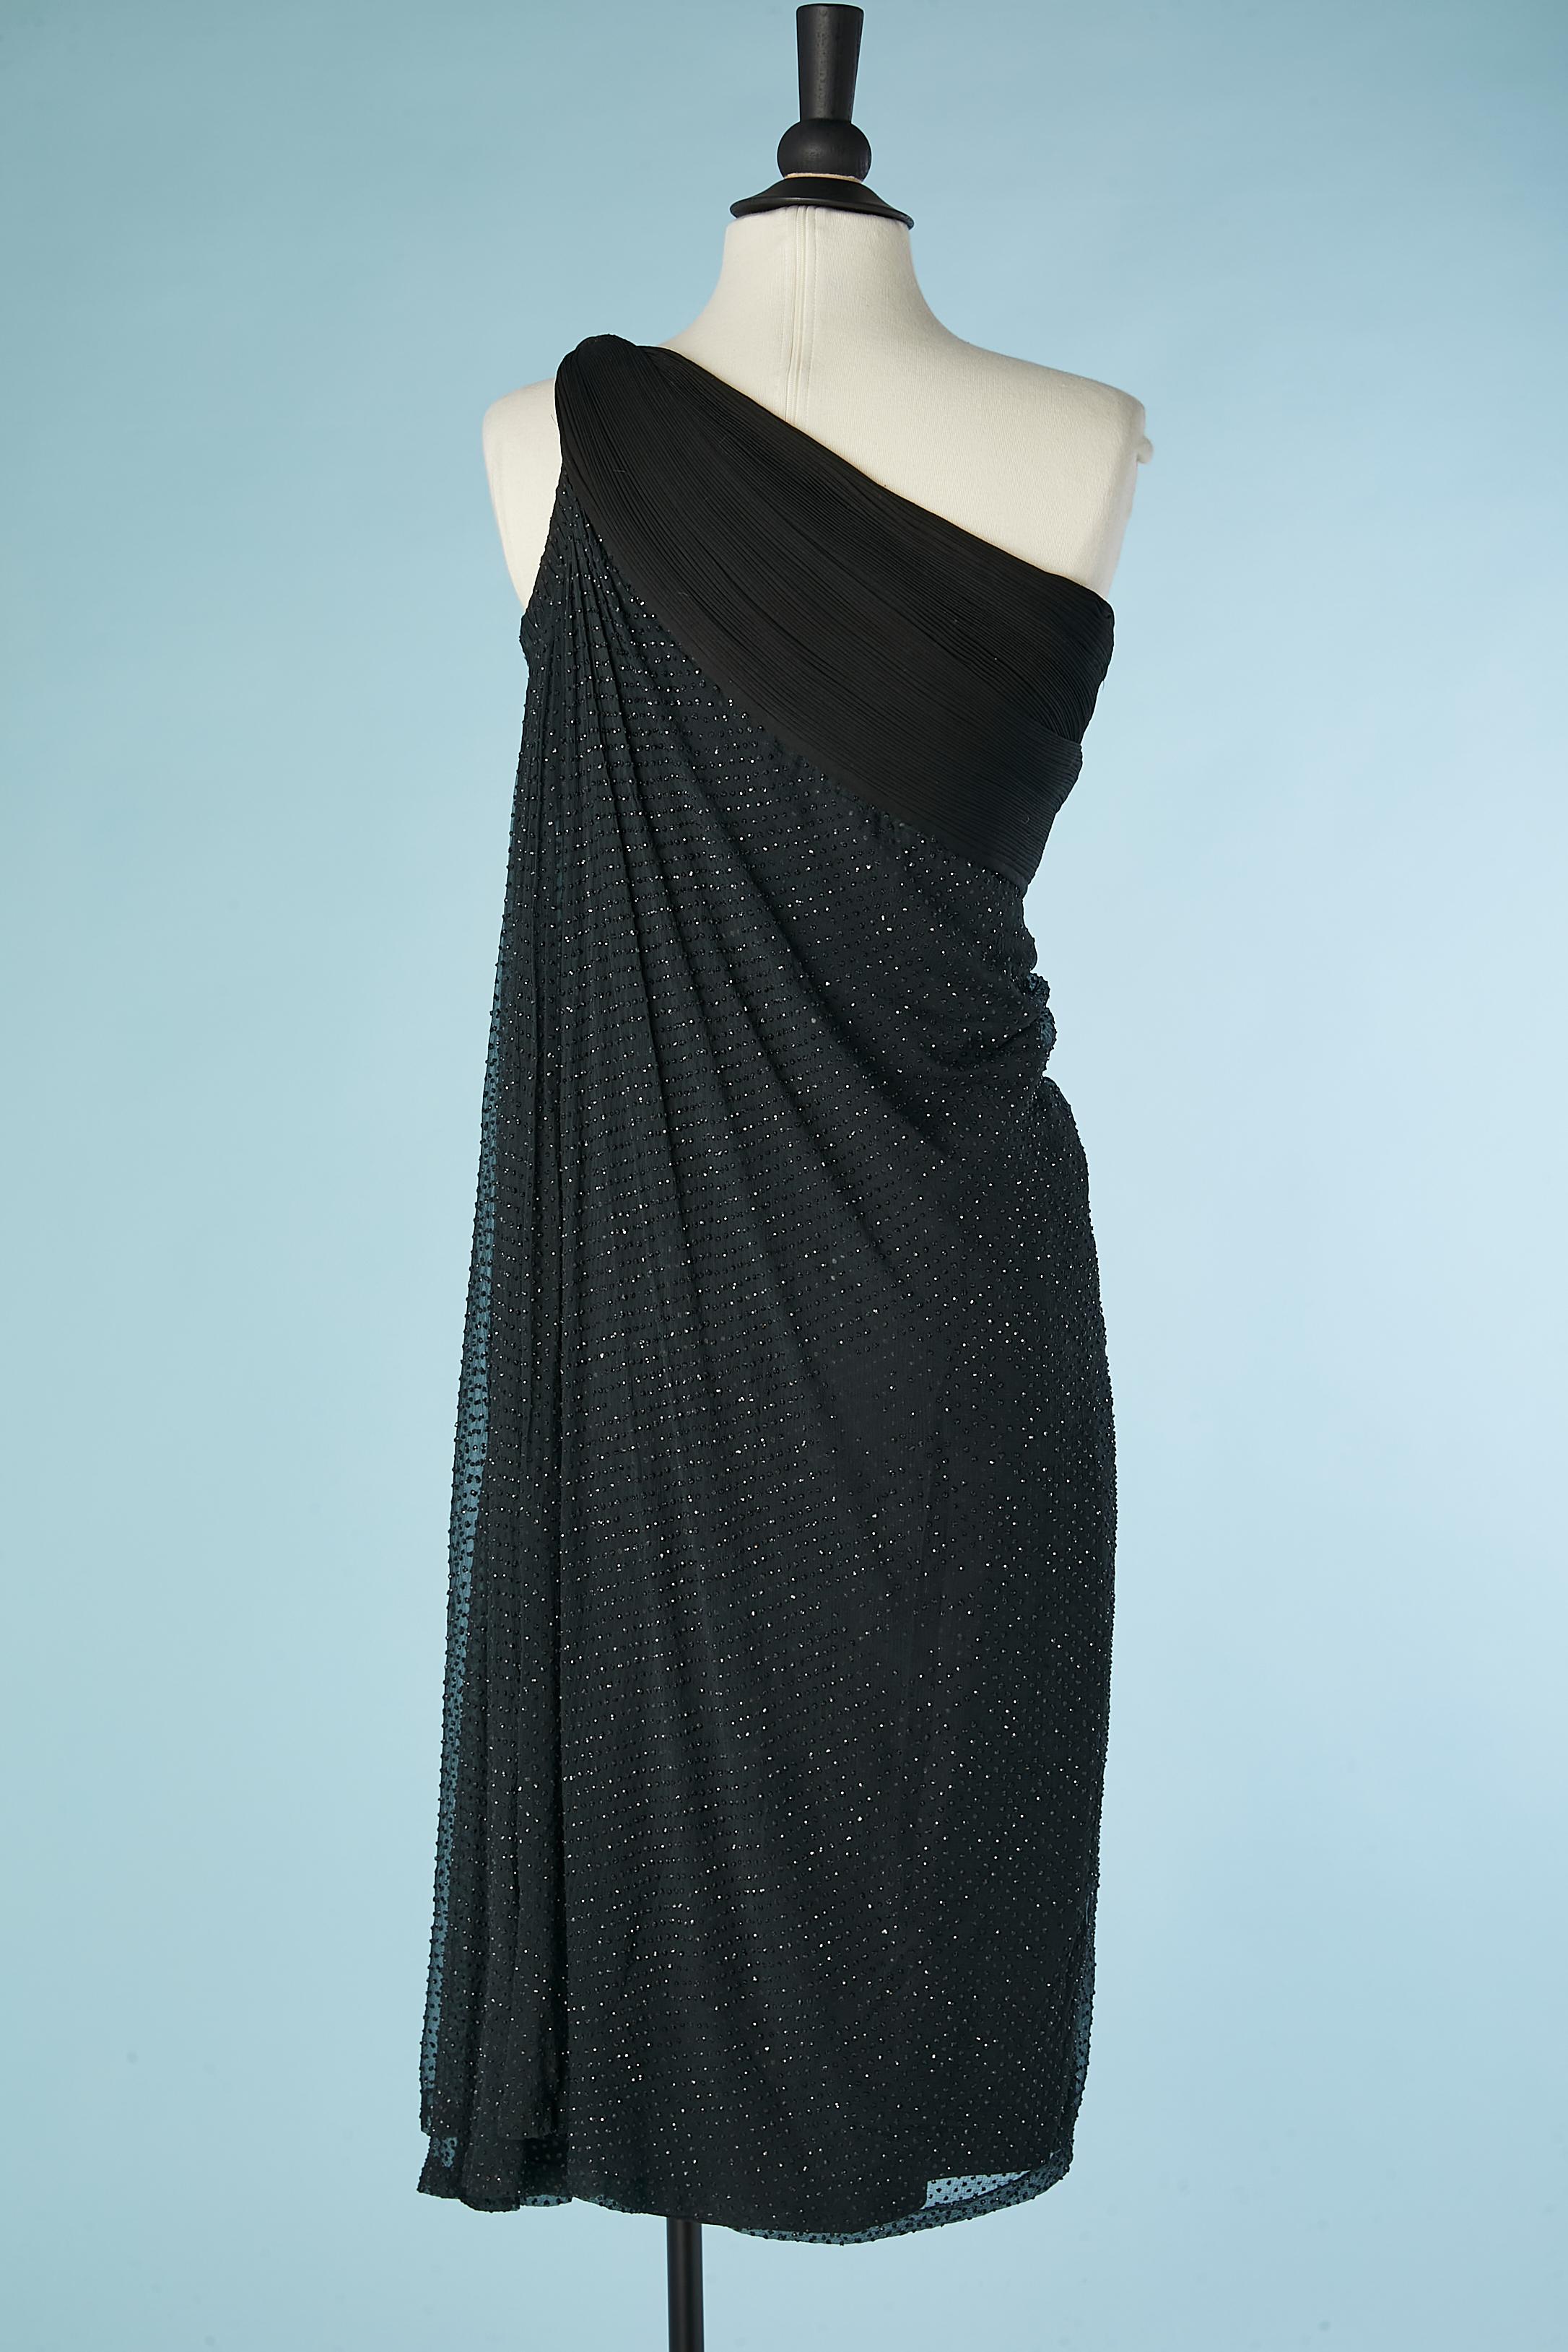 Black asymmetrical cocktail dress pleated and draped Grès 1962 For Sale 3